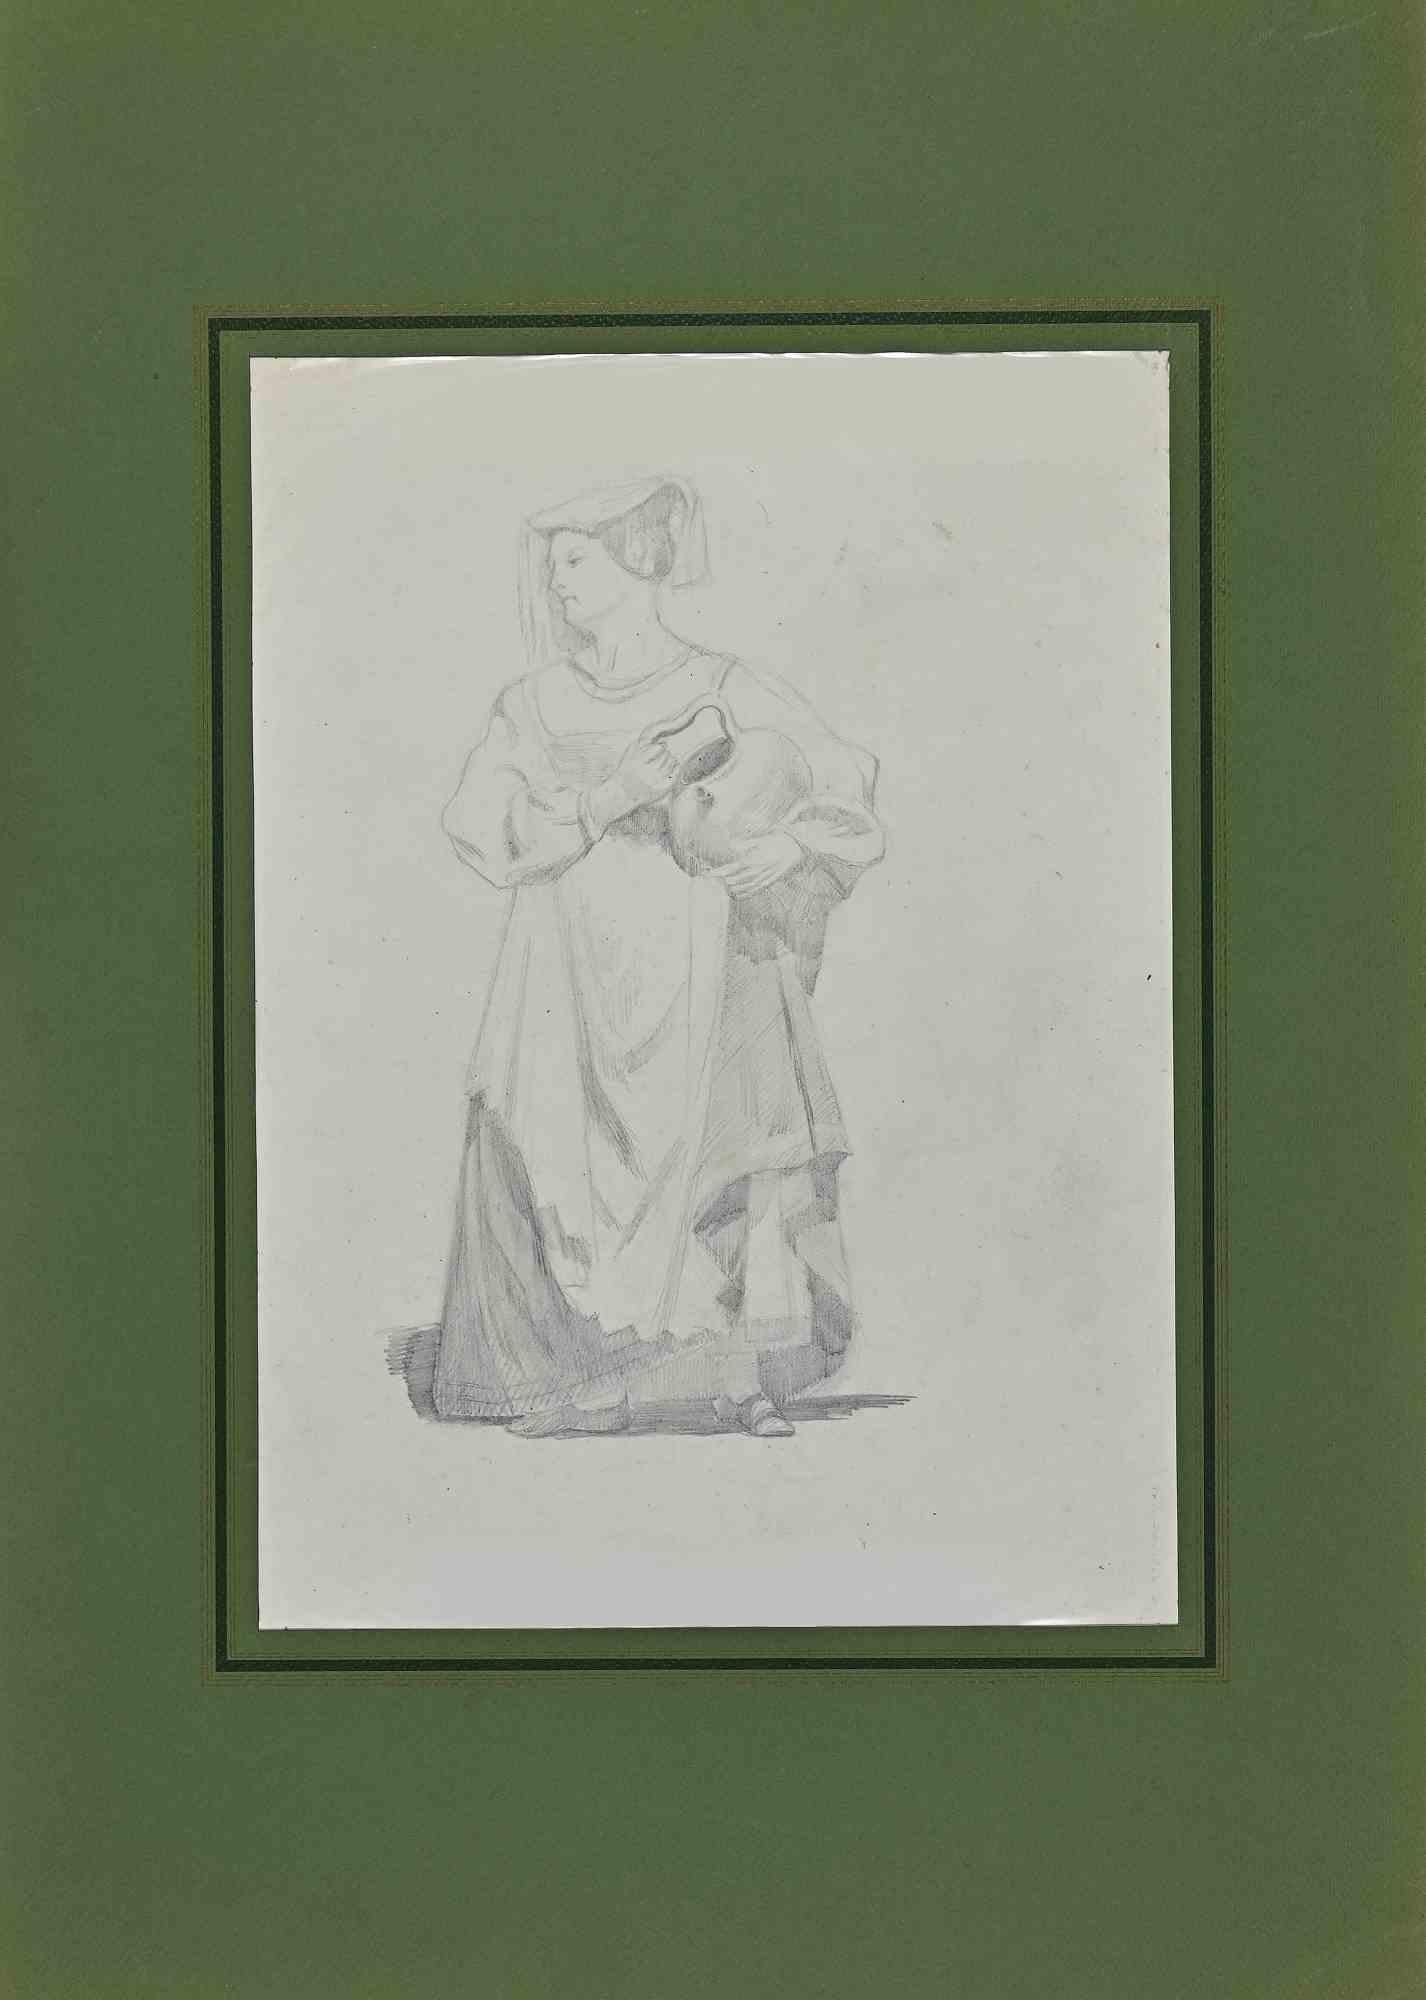 Woman - Original Drawing on Paper by A..E Viollet-Le-Duc  - Mid 19th Century - Art by Adolphe Etienne Viollet-Le-Duc